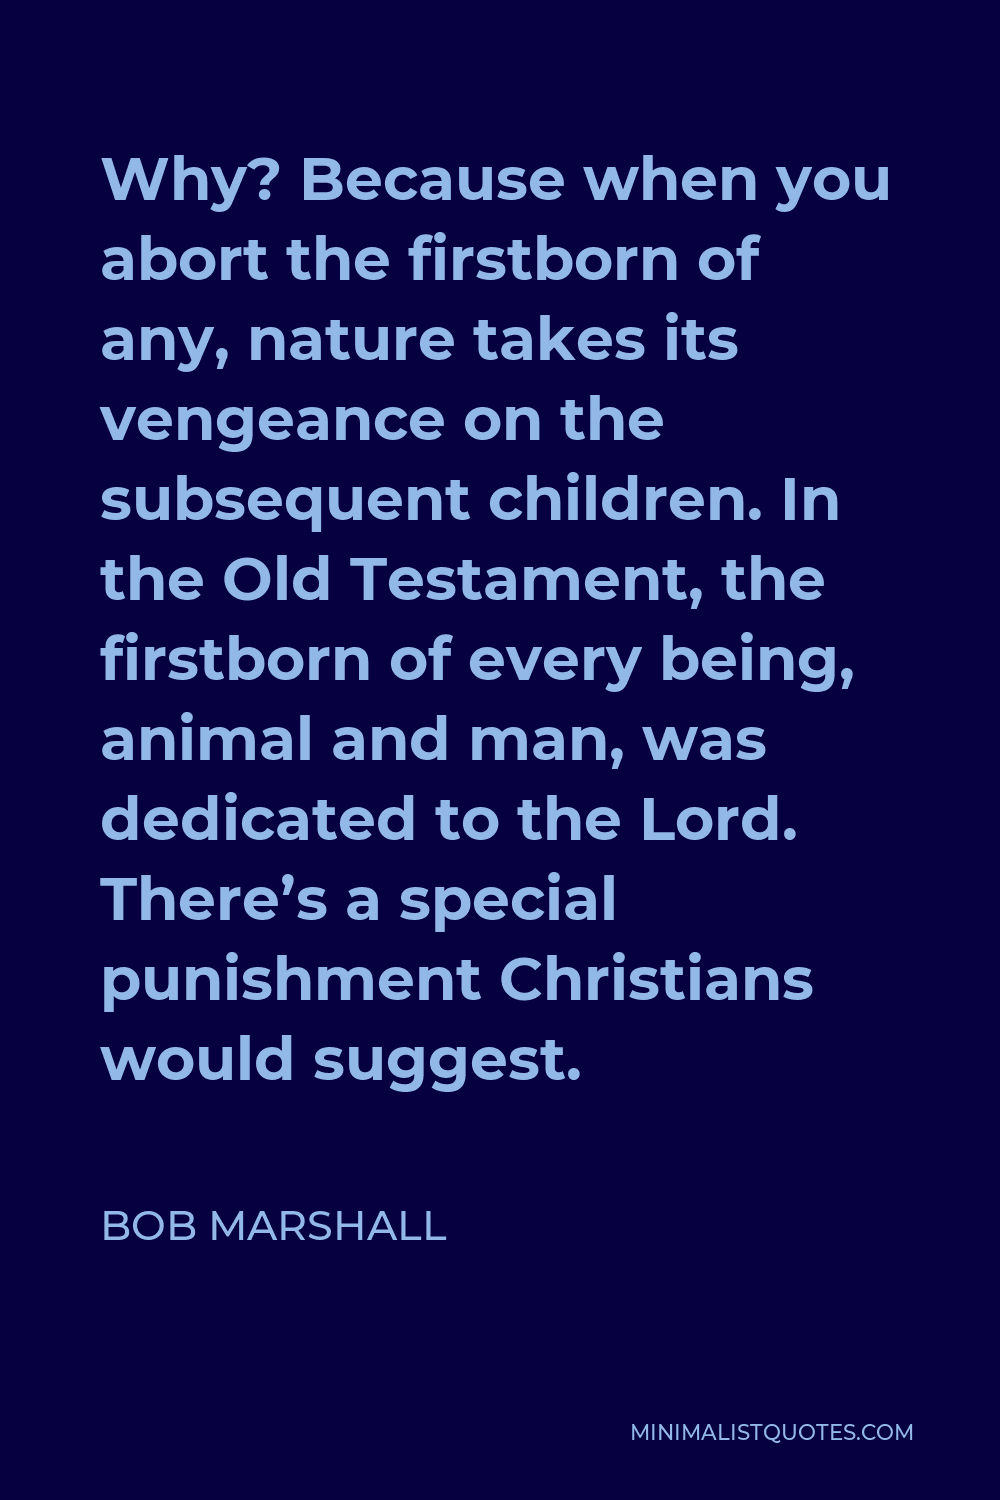 Bob Marshall Quote - Why? Because when you abort the firstborn of any, nature takes its vengeance on the subsequent children. In the Old Testament, the firstborn of every being, animal and man, was dedicated to the Lord. There’s a special punishment Christians would suggest.